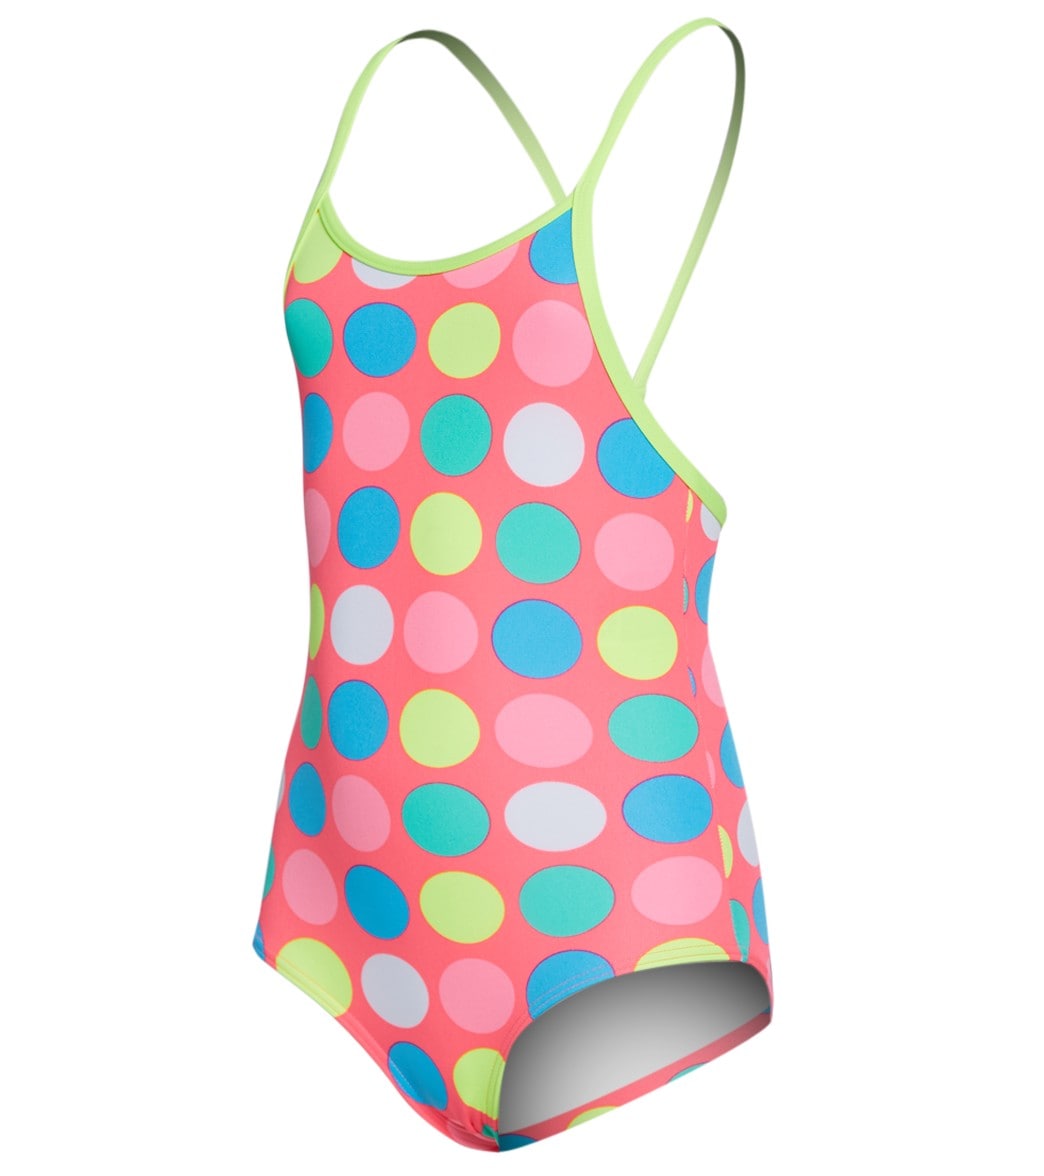 Funkita Toddler Girls' Twister Printed One Piece Swimsuit - Multi Pink 1 Polyester - Swimoutlet.com